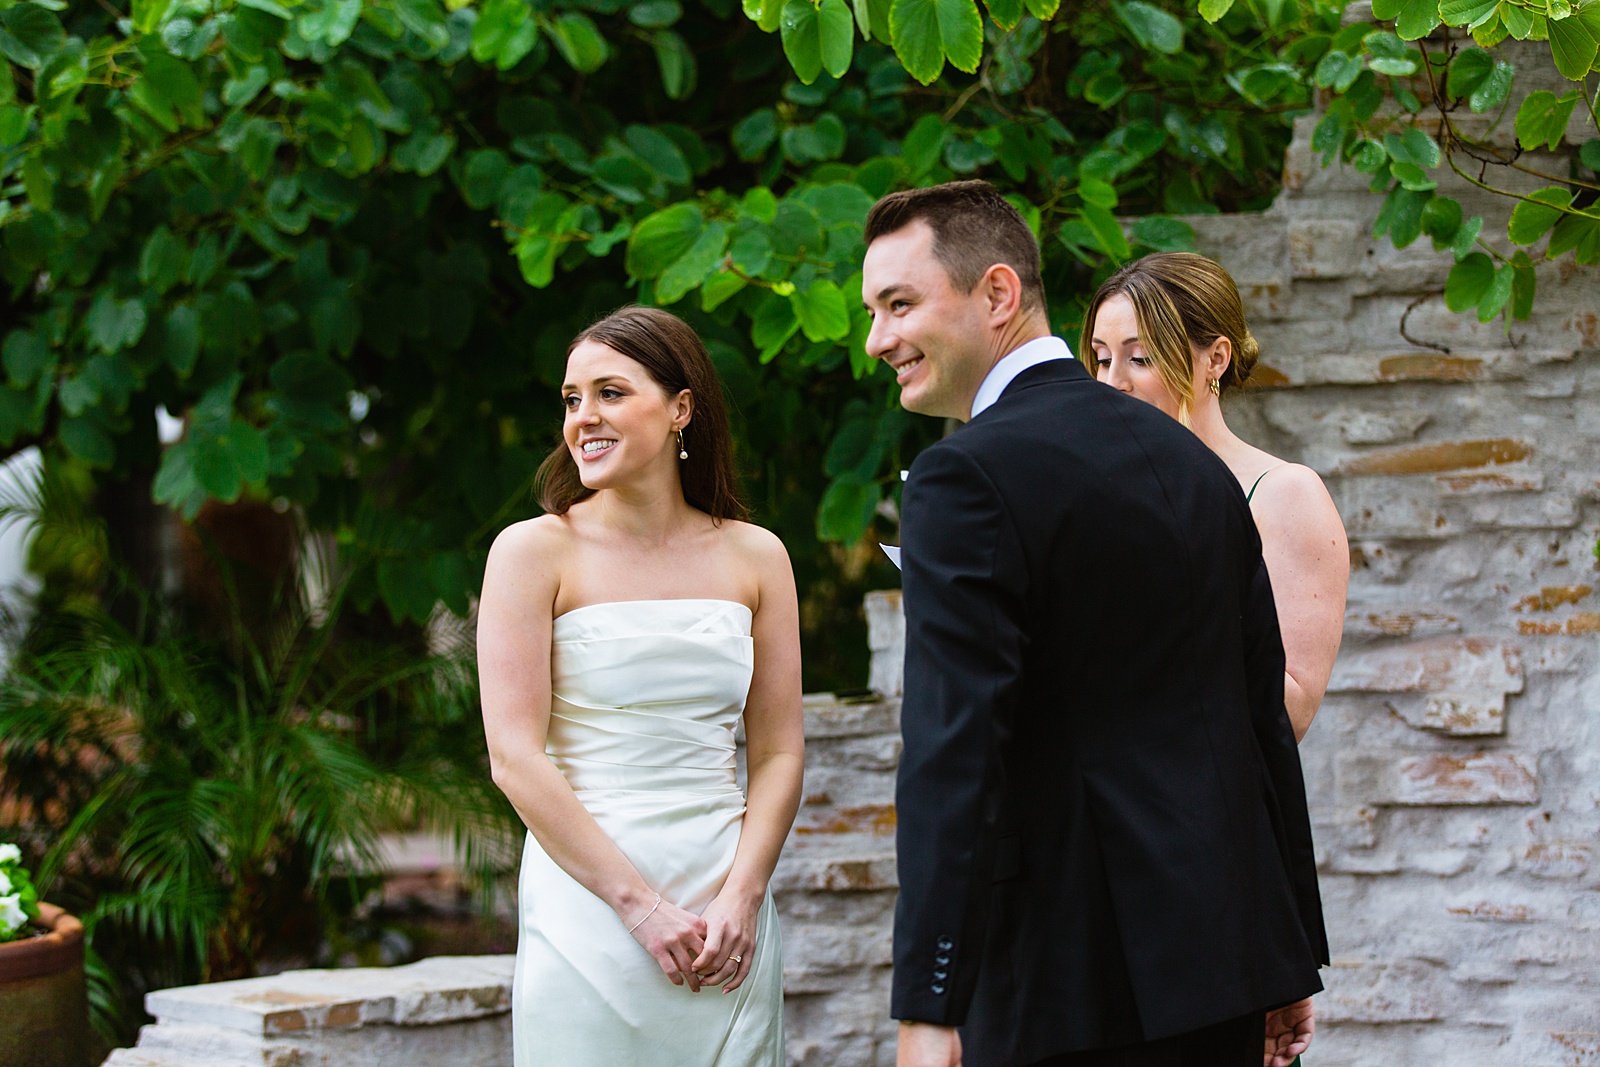 Bride & Groom laughing together during their wedding ceremony at The Scott by Phoenix wedding photographer PMA Photography.